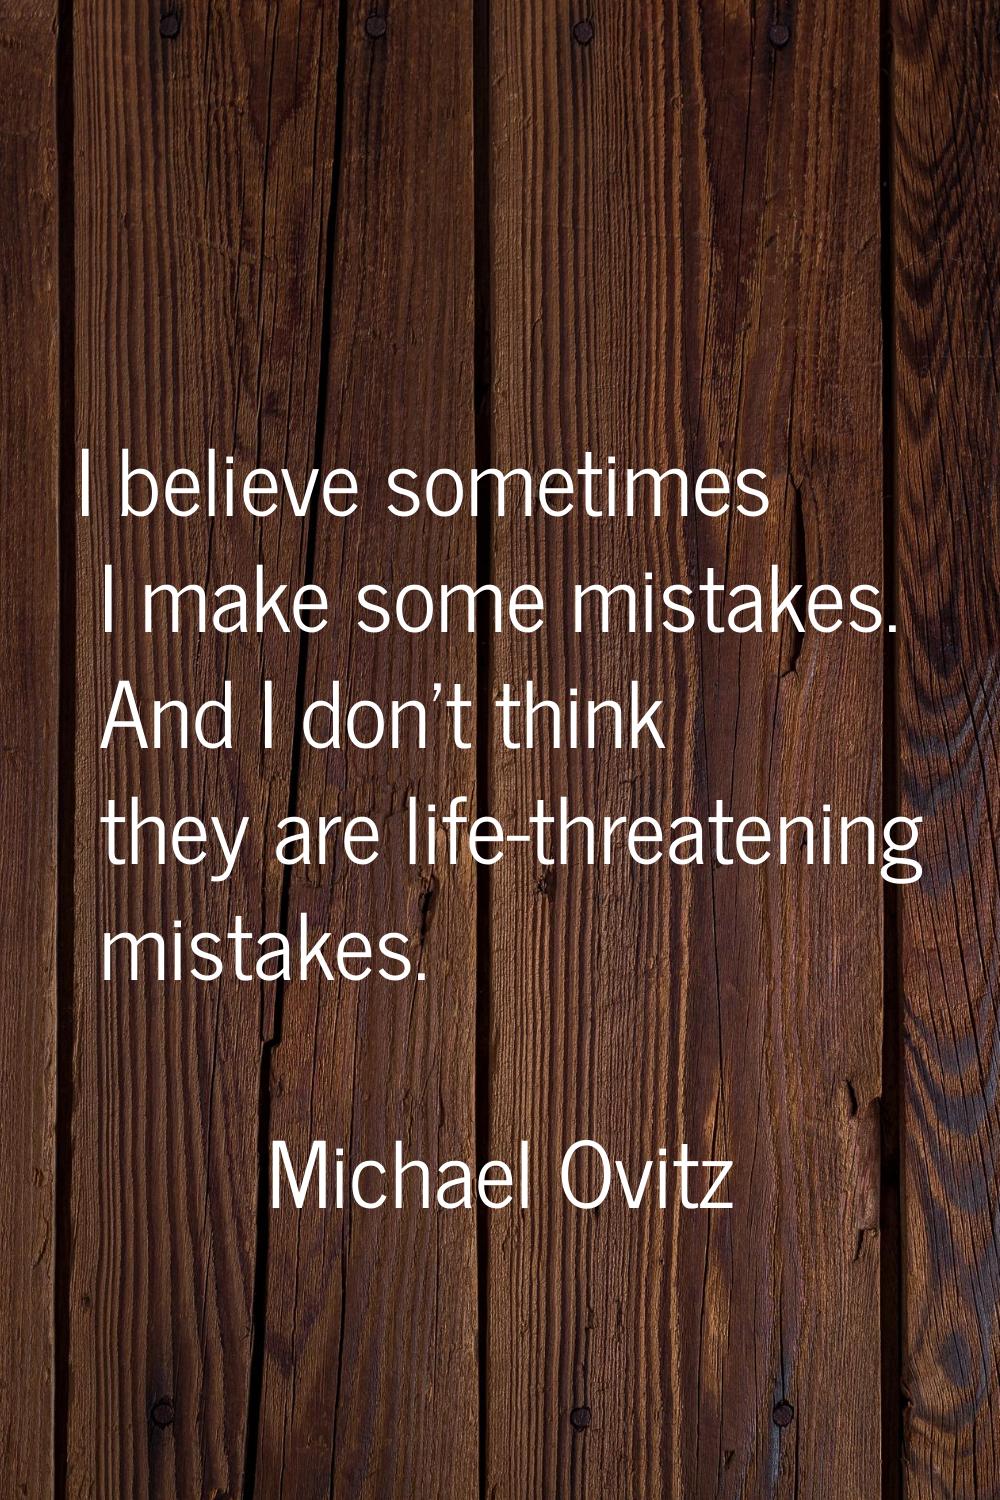 I believe sometimes I make some mistakes. And I don't think they are life-threatening mistakes.